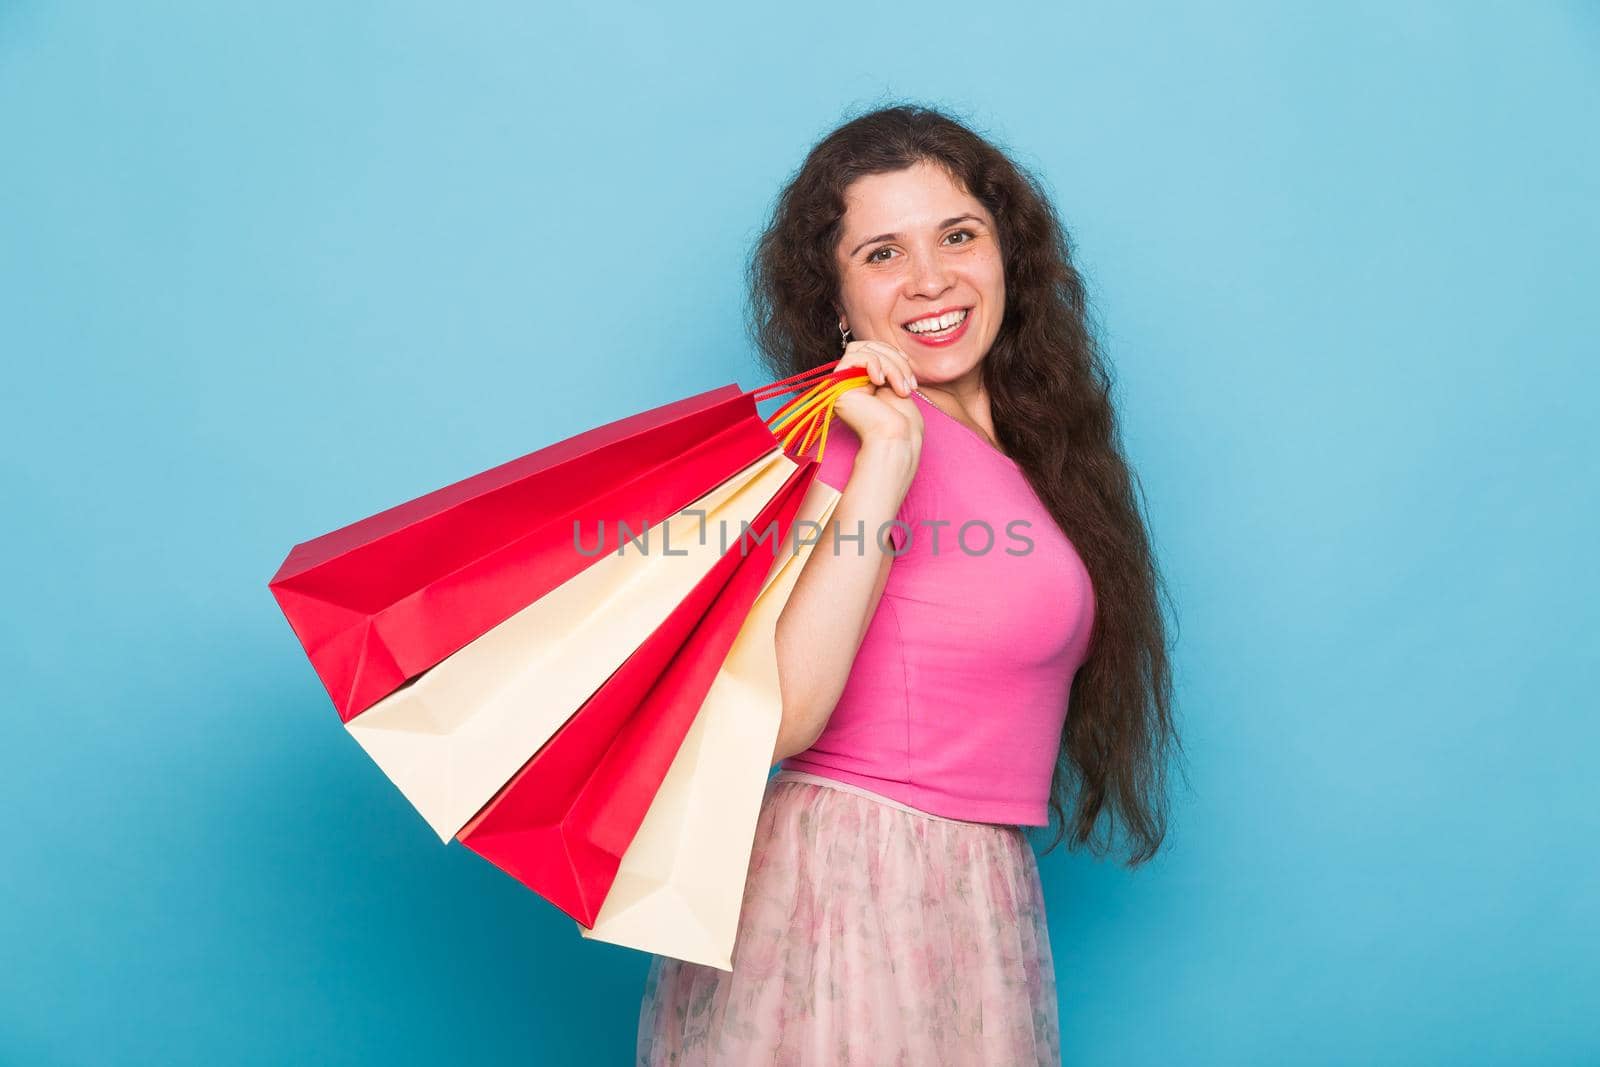 Portrait of young happy smiling woman with shopping bags, over blue background. Purchase, sale and people concept.